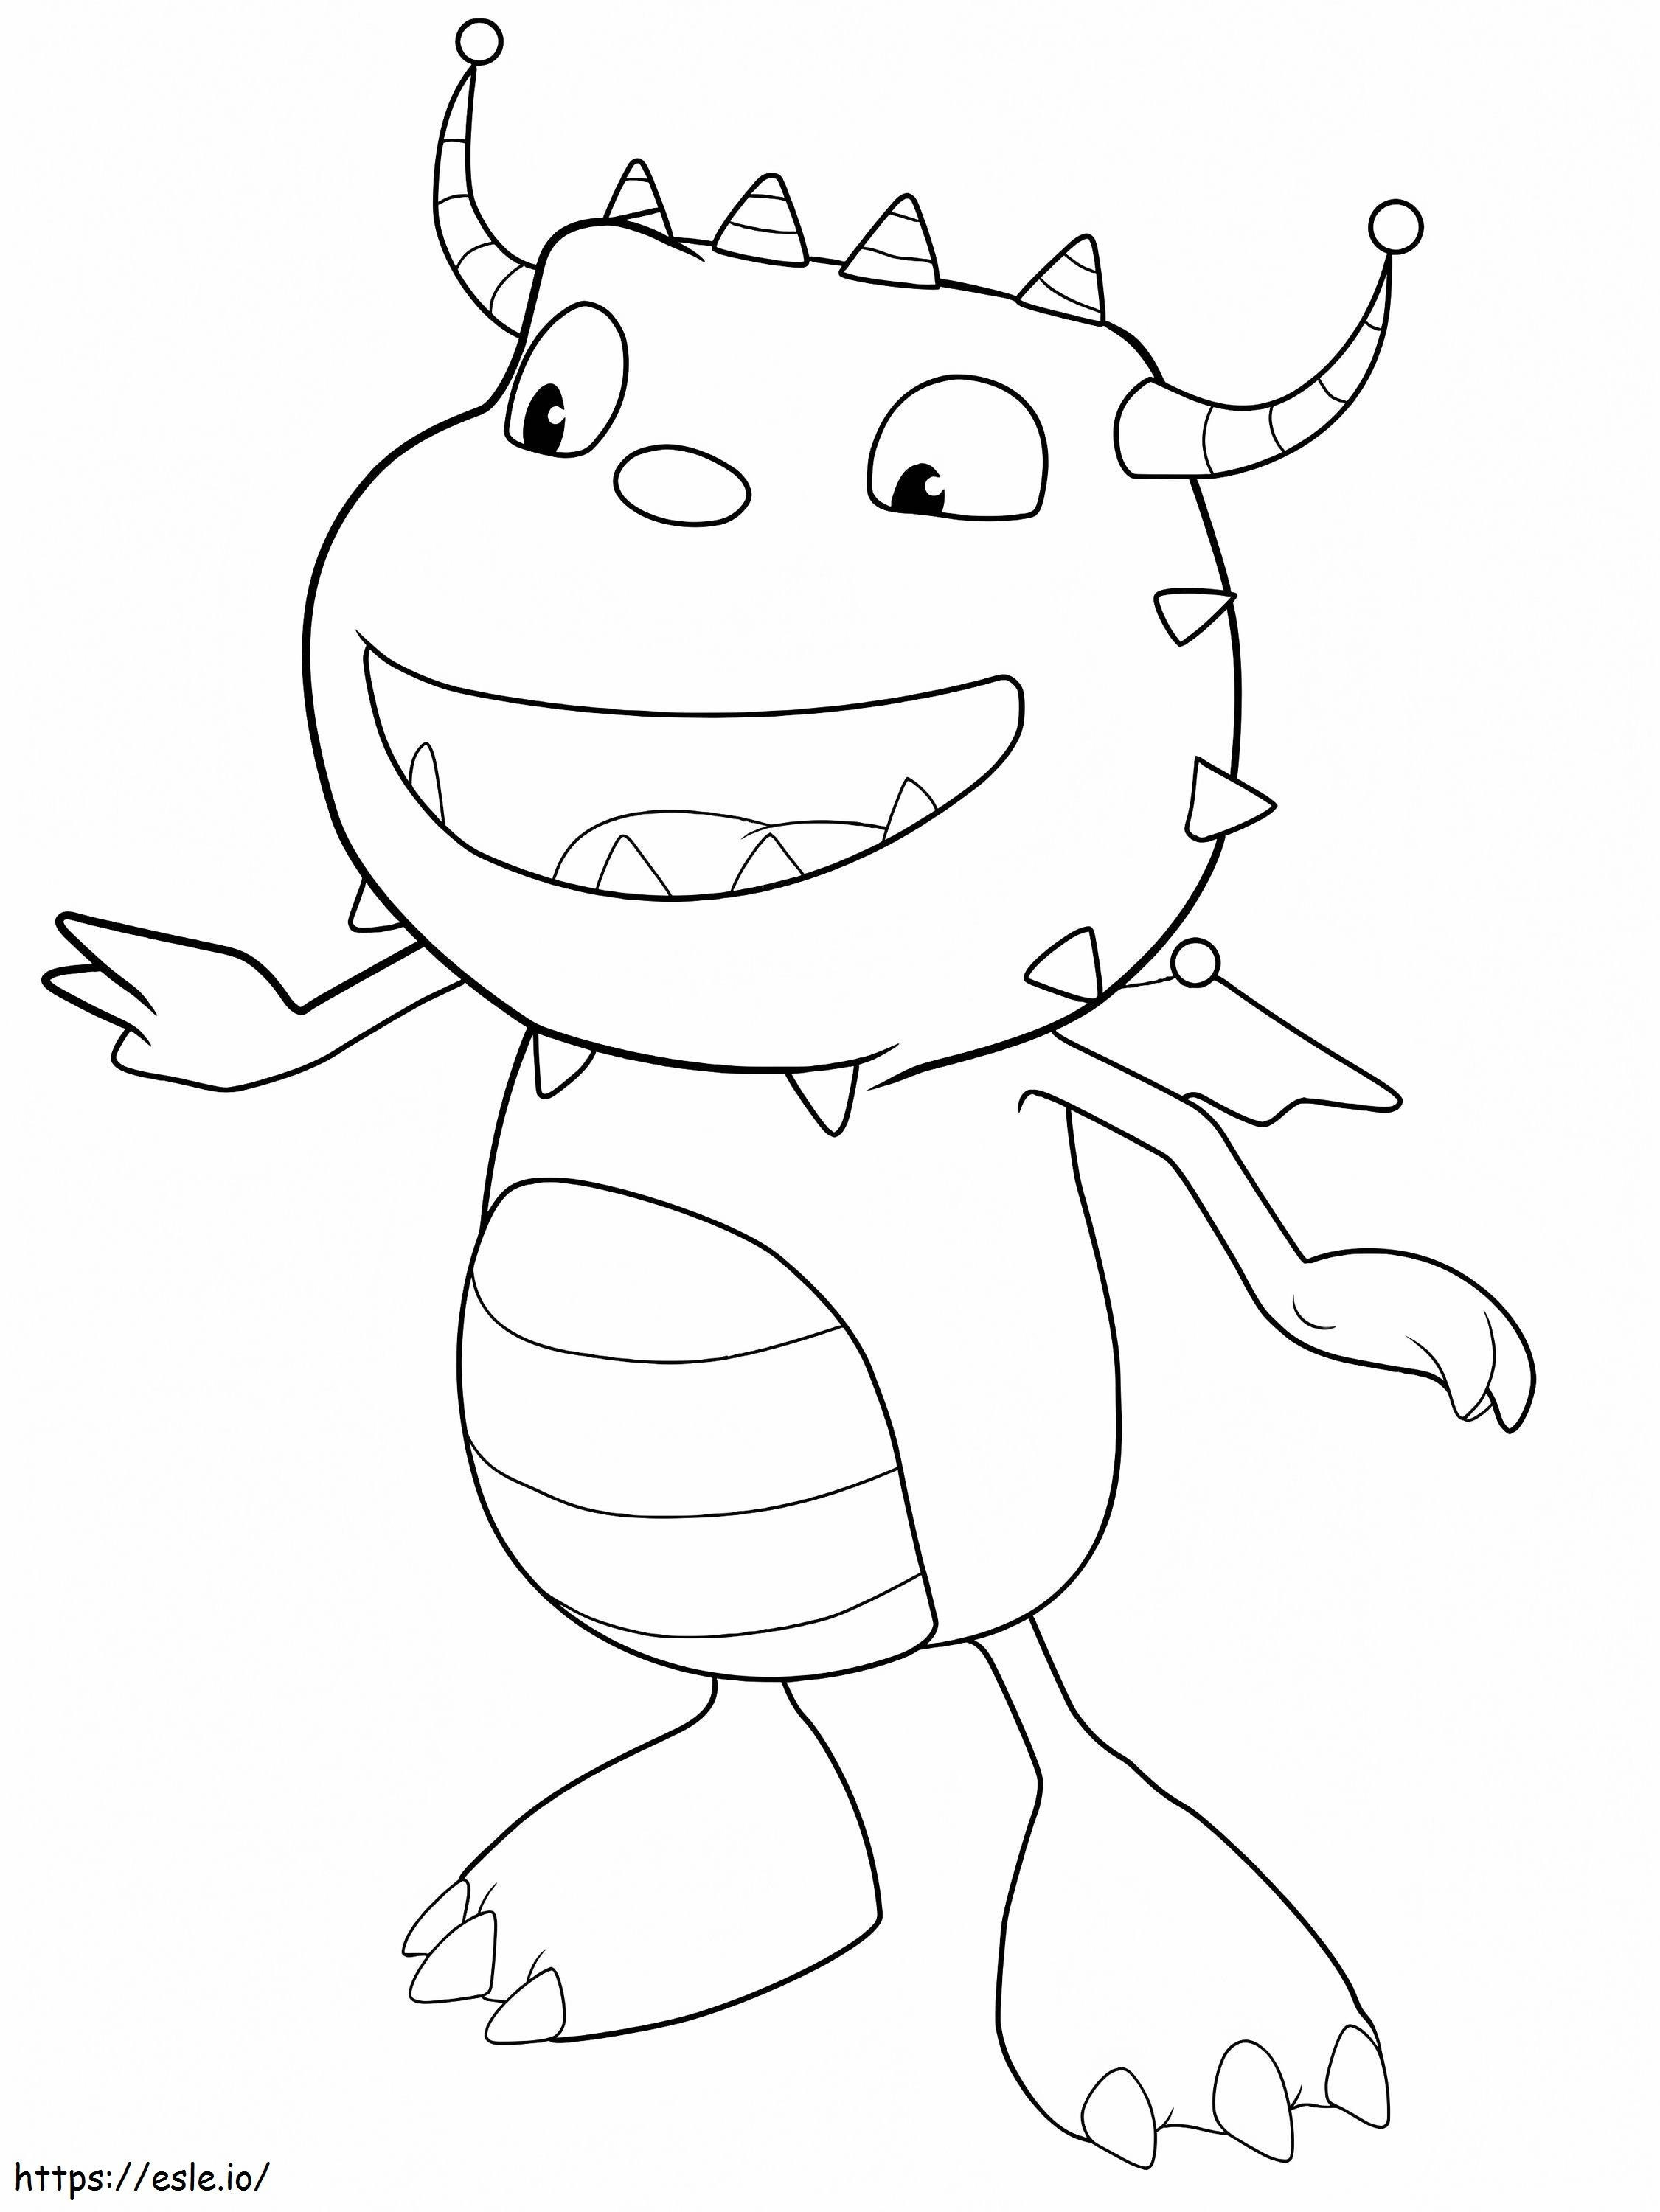 1582794180 9Ipblpypt coloring page